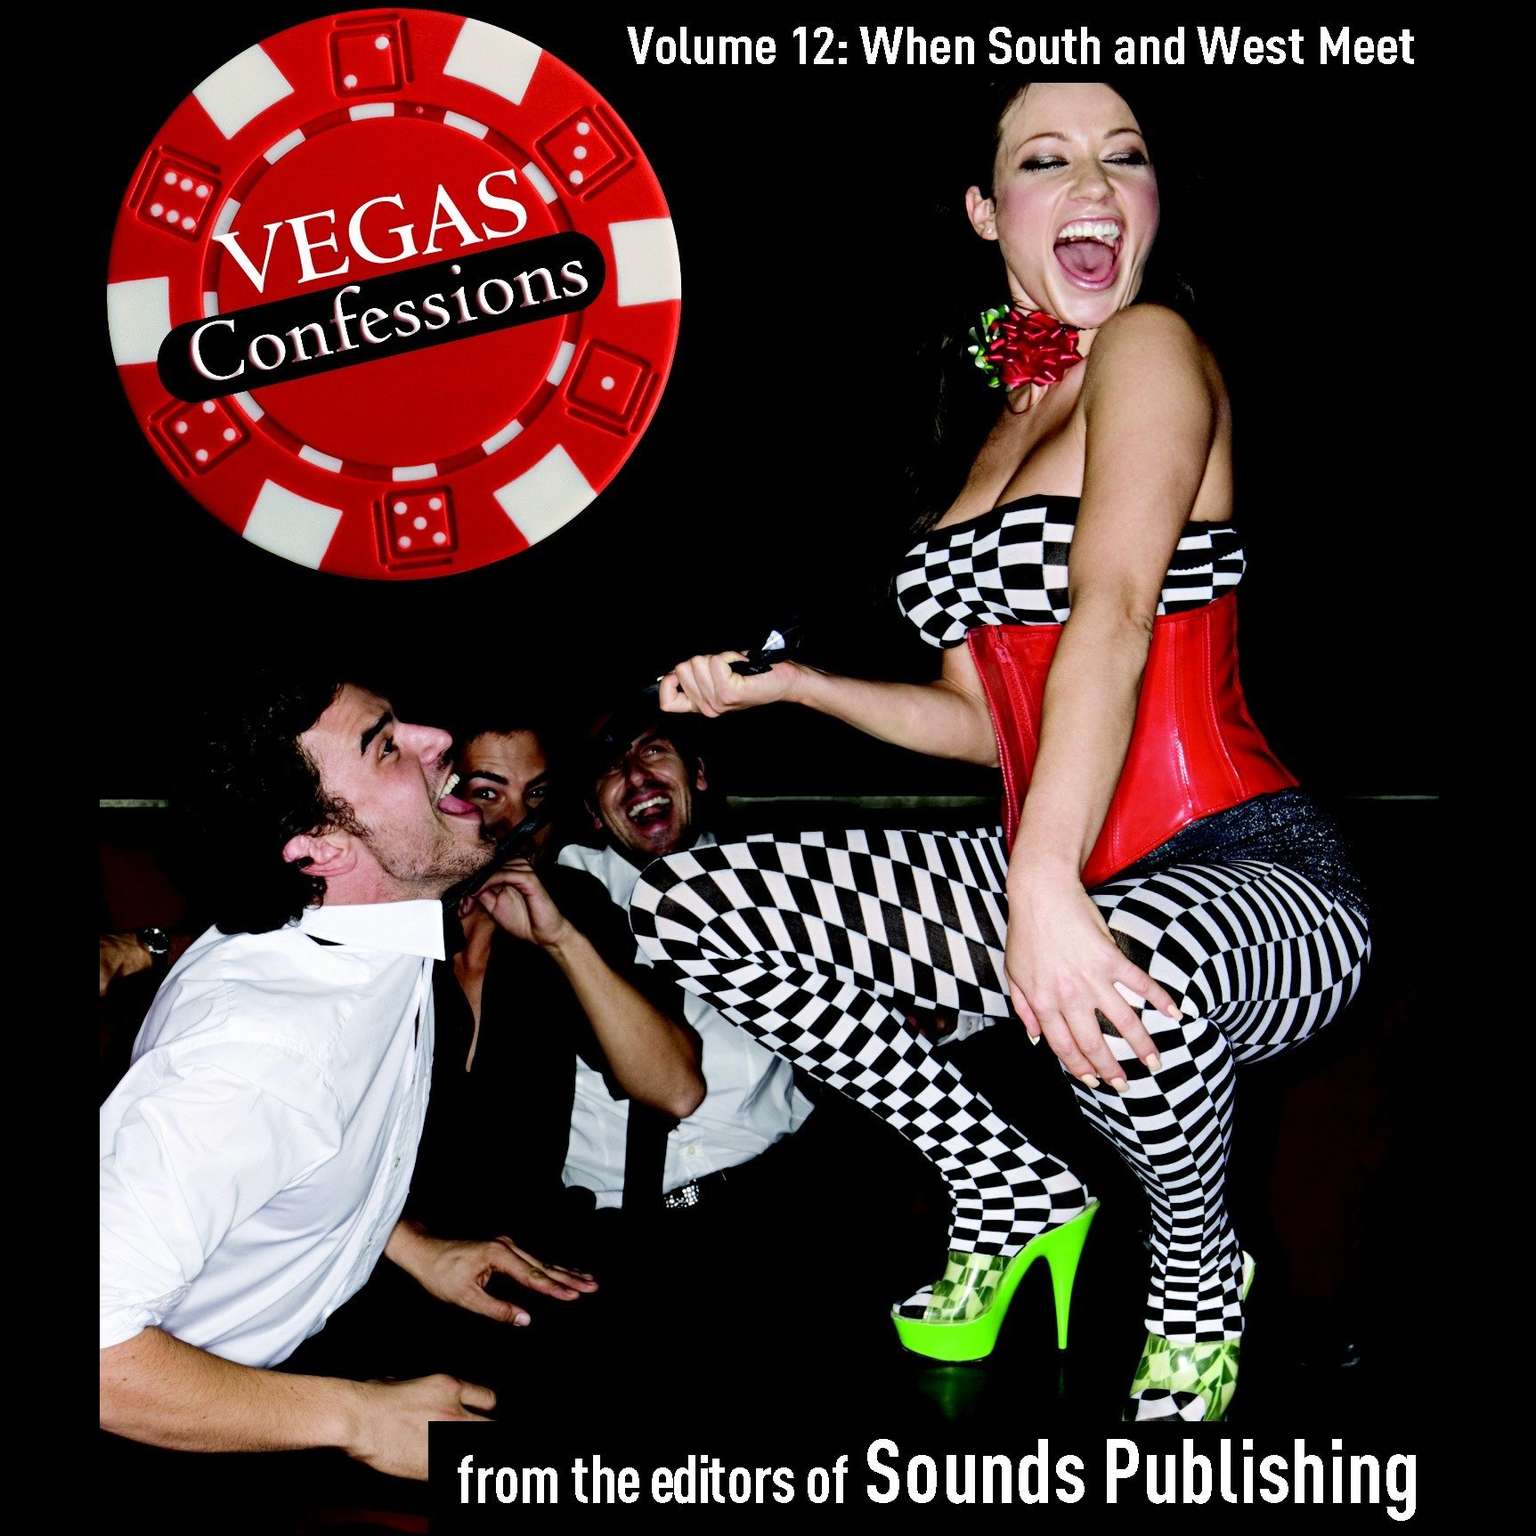 Vegas Confessions 12: When South and West Meet Audiobook, by The Editors of Sounds Publishing